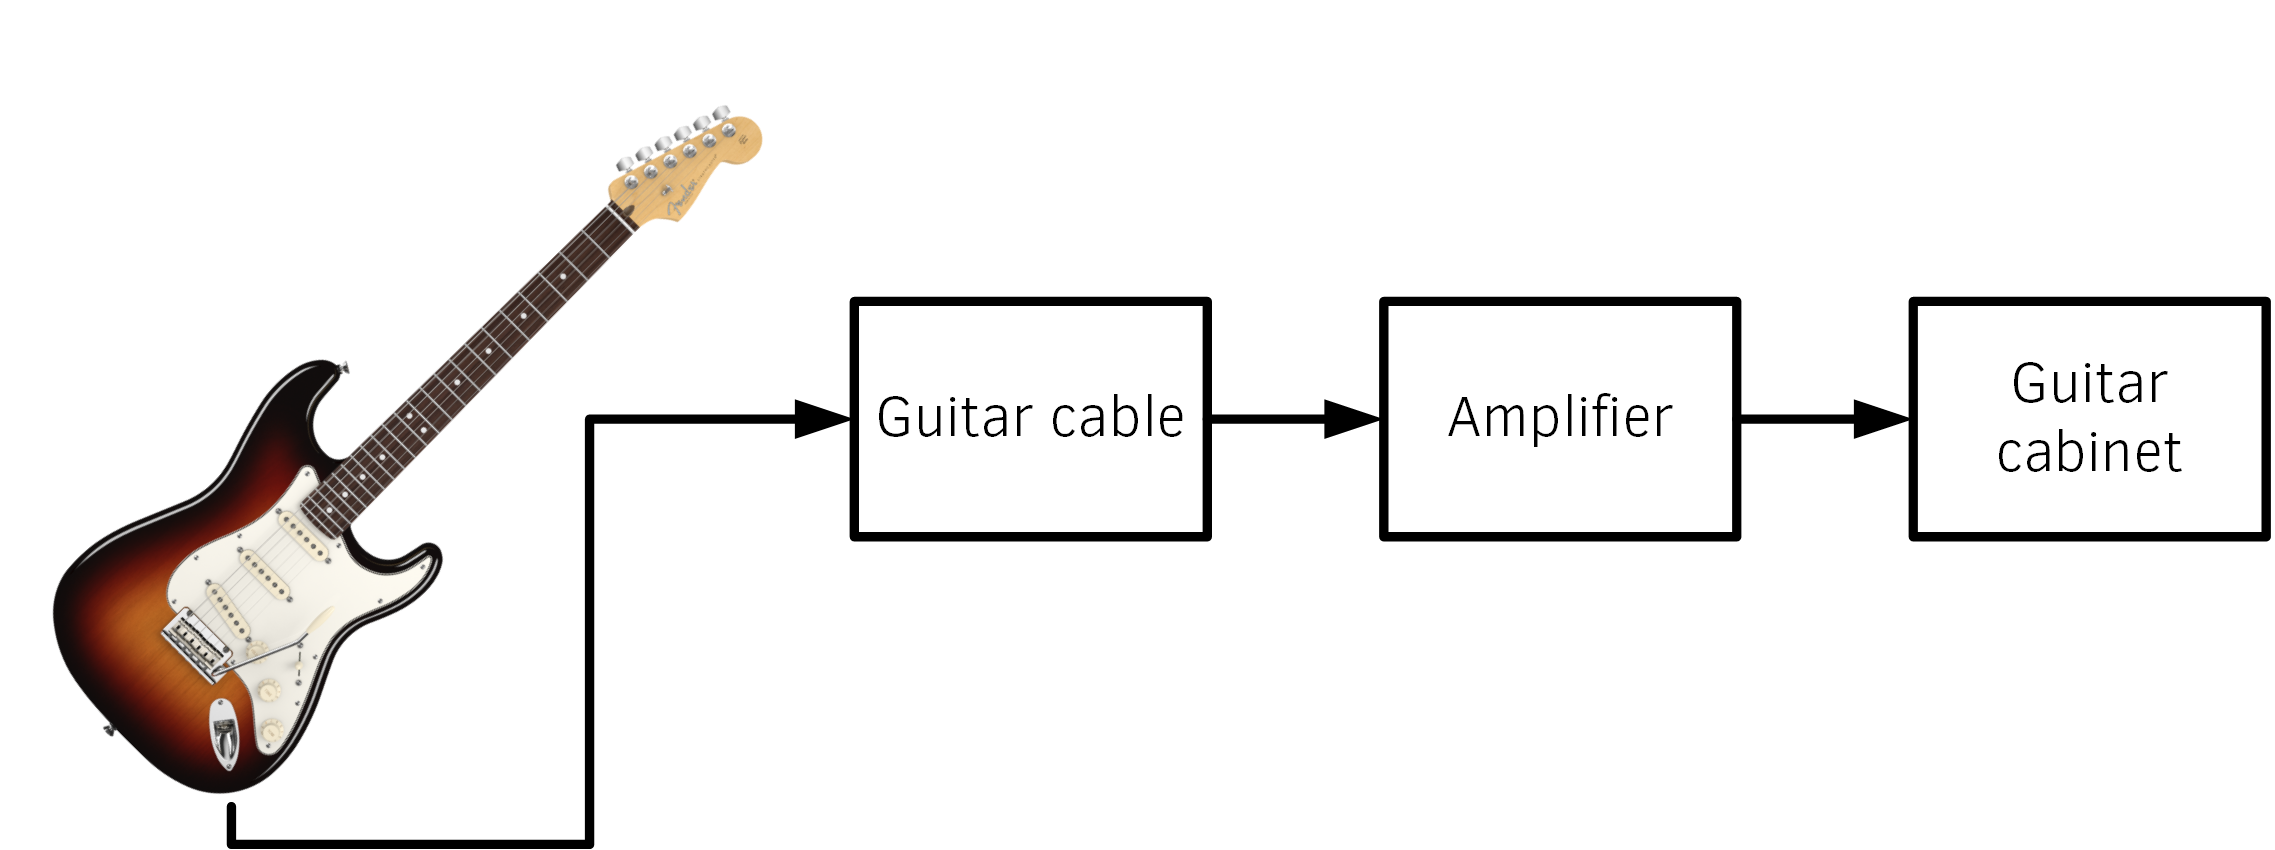 Traditional signal chain